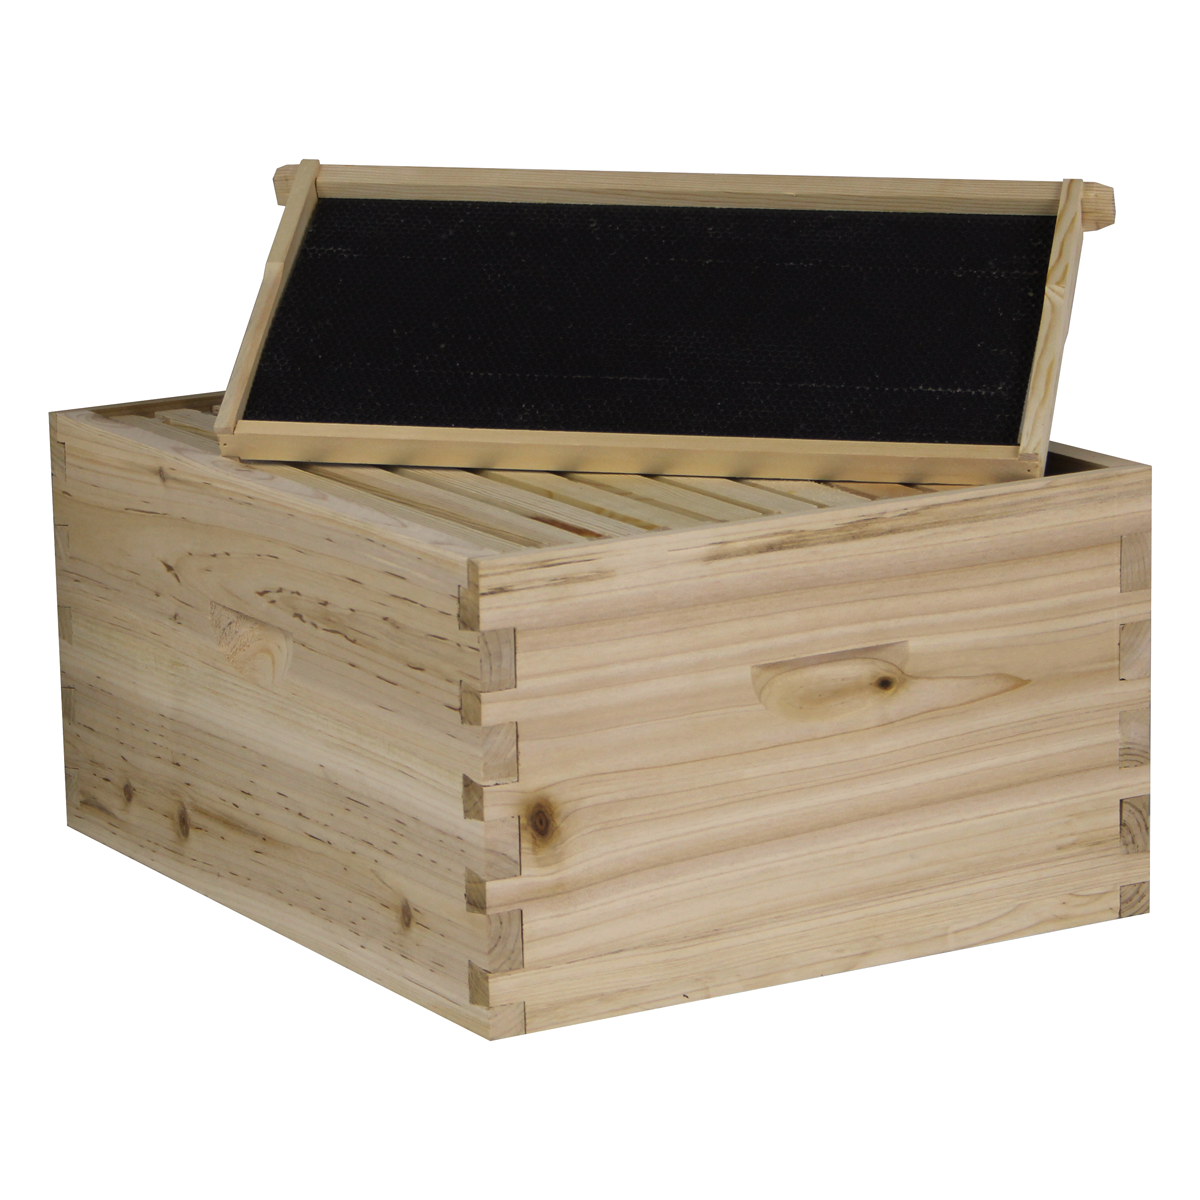 NuBee 10 Frame Deep Brood Box With Frames & Foundations